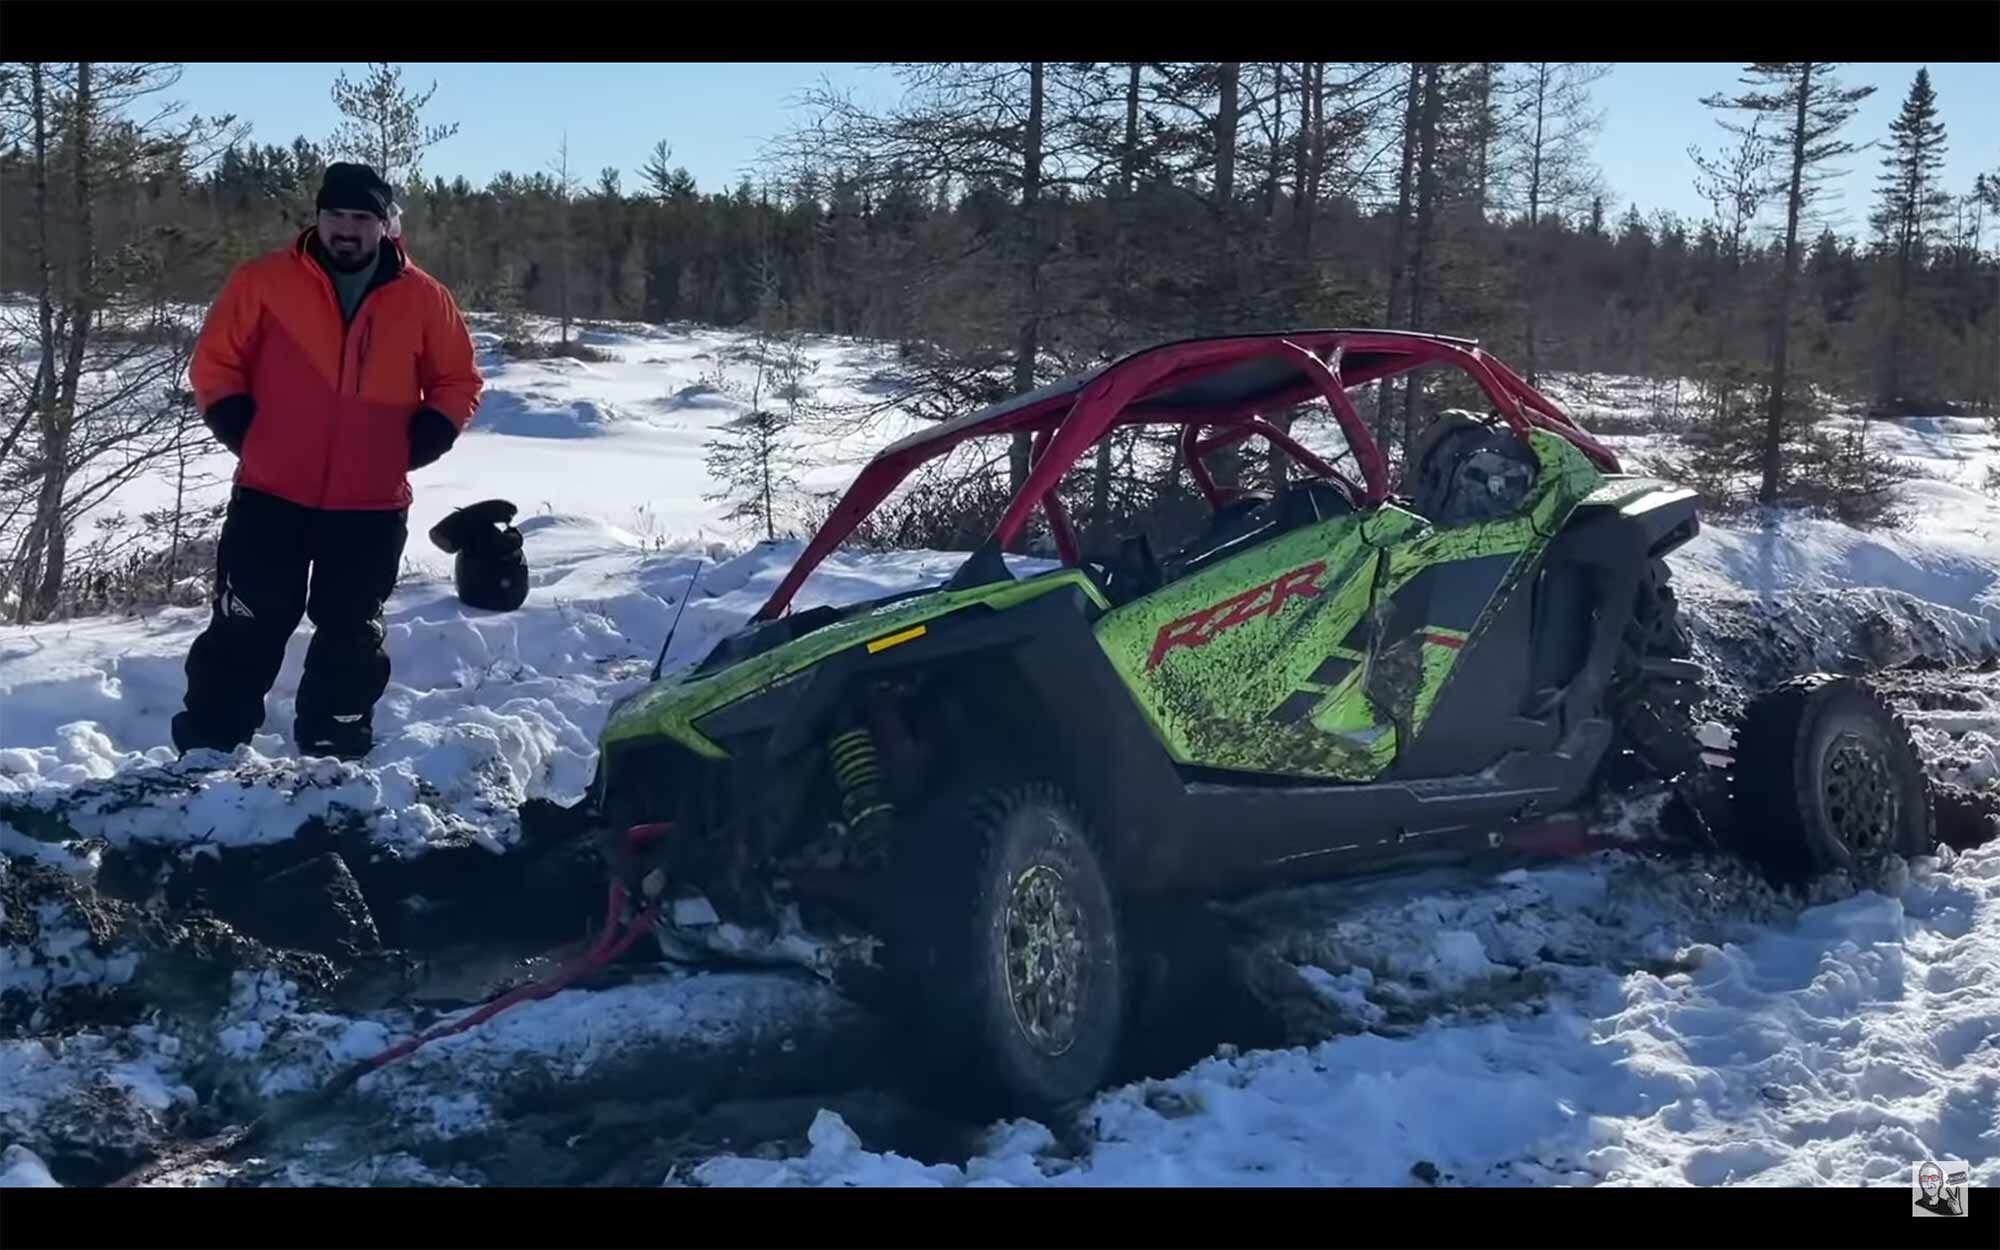 Michigan mud is sticky, even in weather 18 degrees below zero, and some pulls from a snatch strap weren’t nearly enough to get the Polaris shifted.